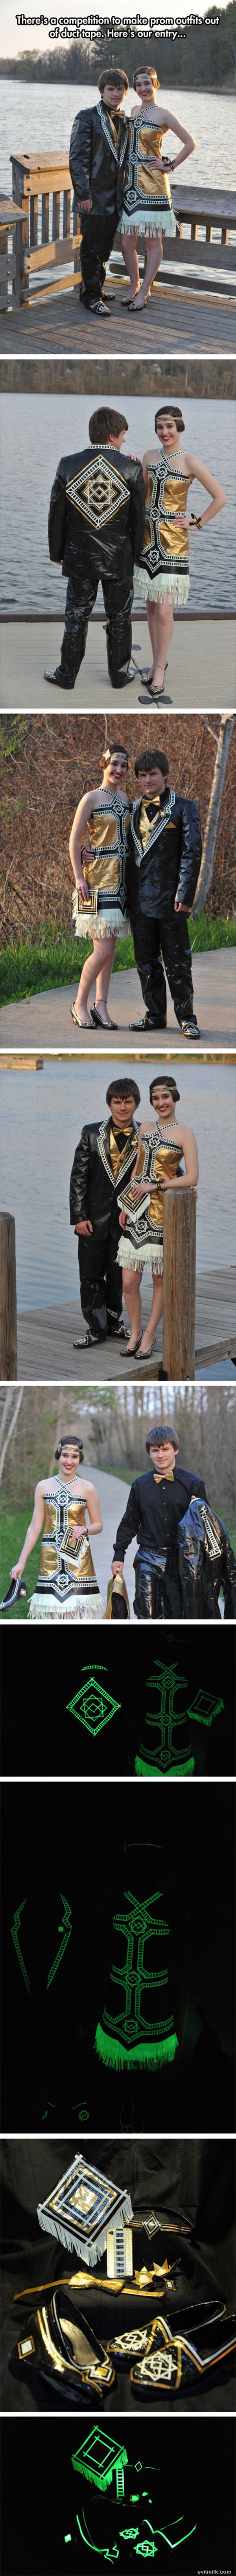 Duct Tape Prom